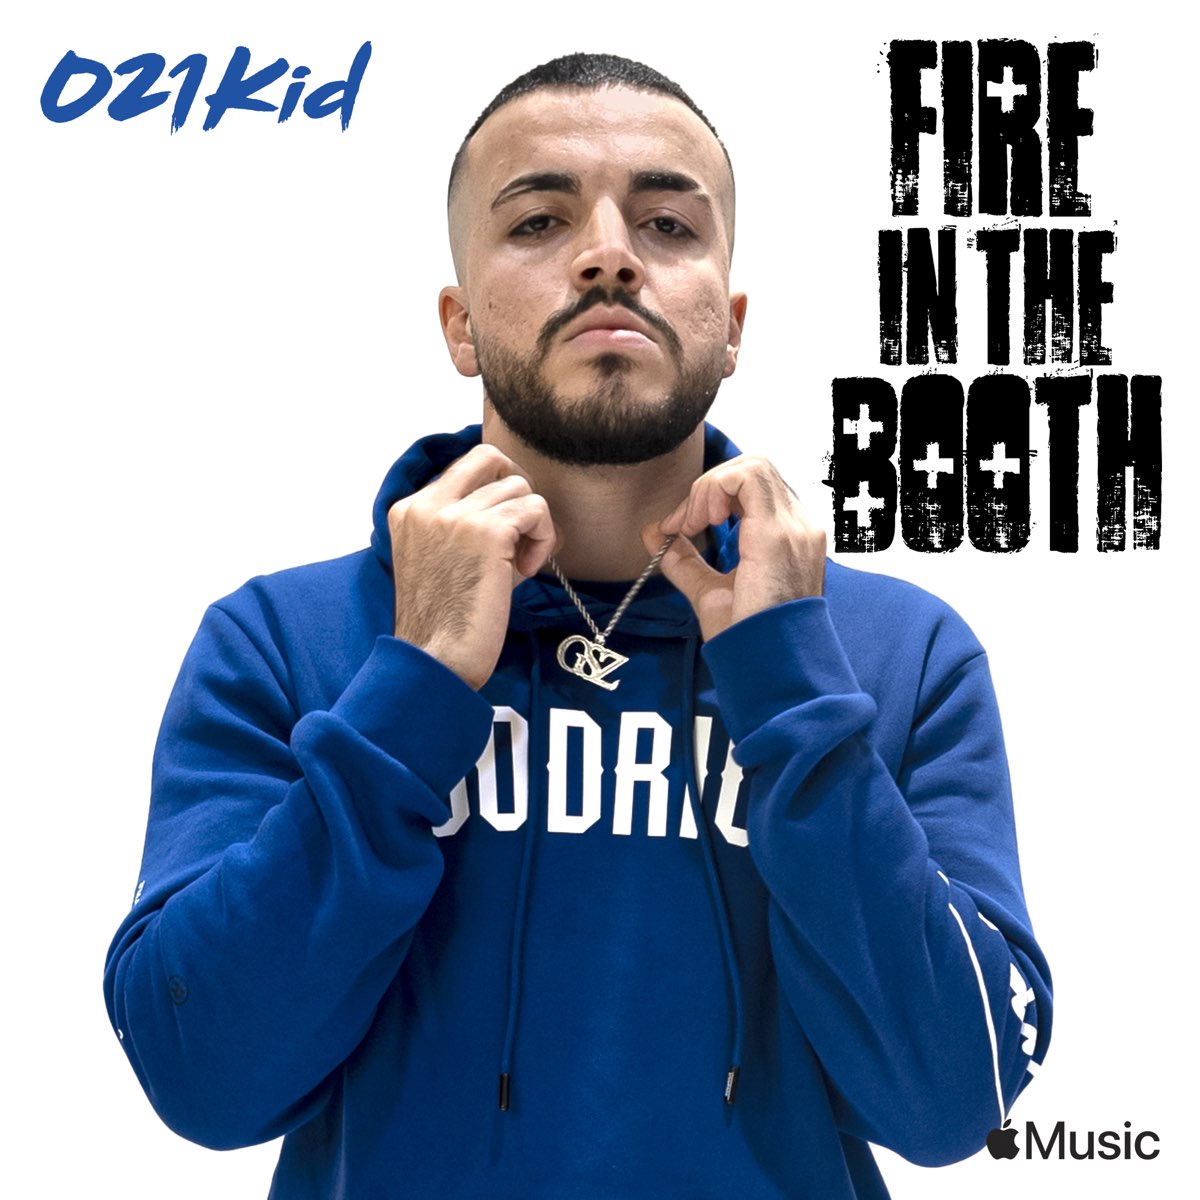 C1 & Charlie Sloth – Fire In The Booth Lyrics